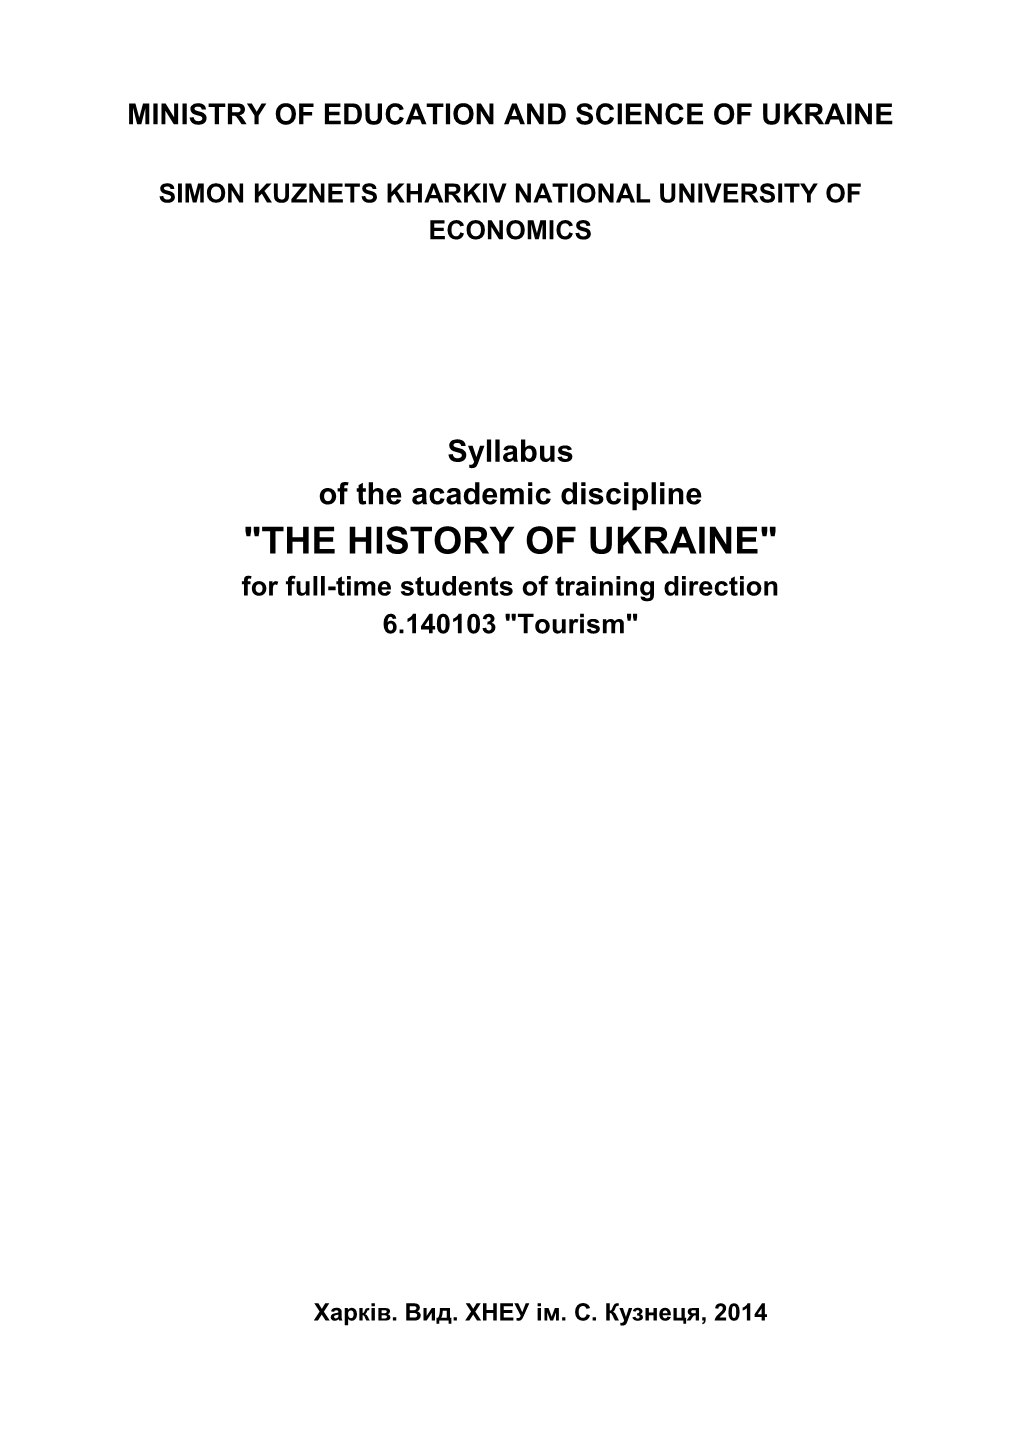 Syllabus of the Academic Discipline "THE HISTORY of UKRAINE" for Full-Time Students of Training Direction 6.140103 "Tourism"